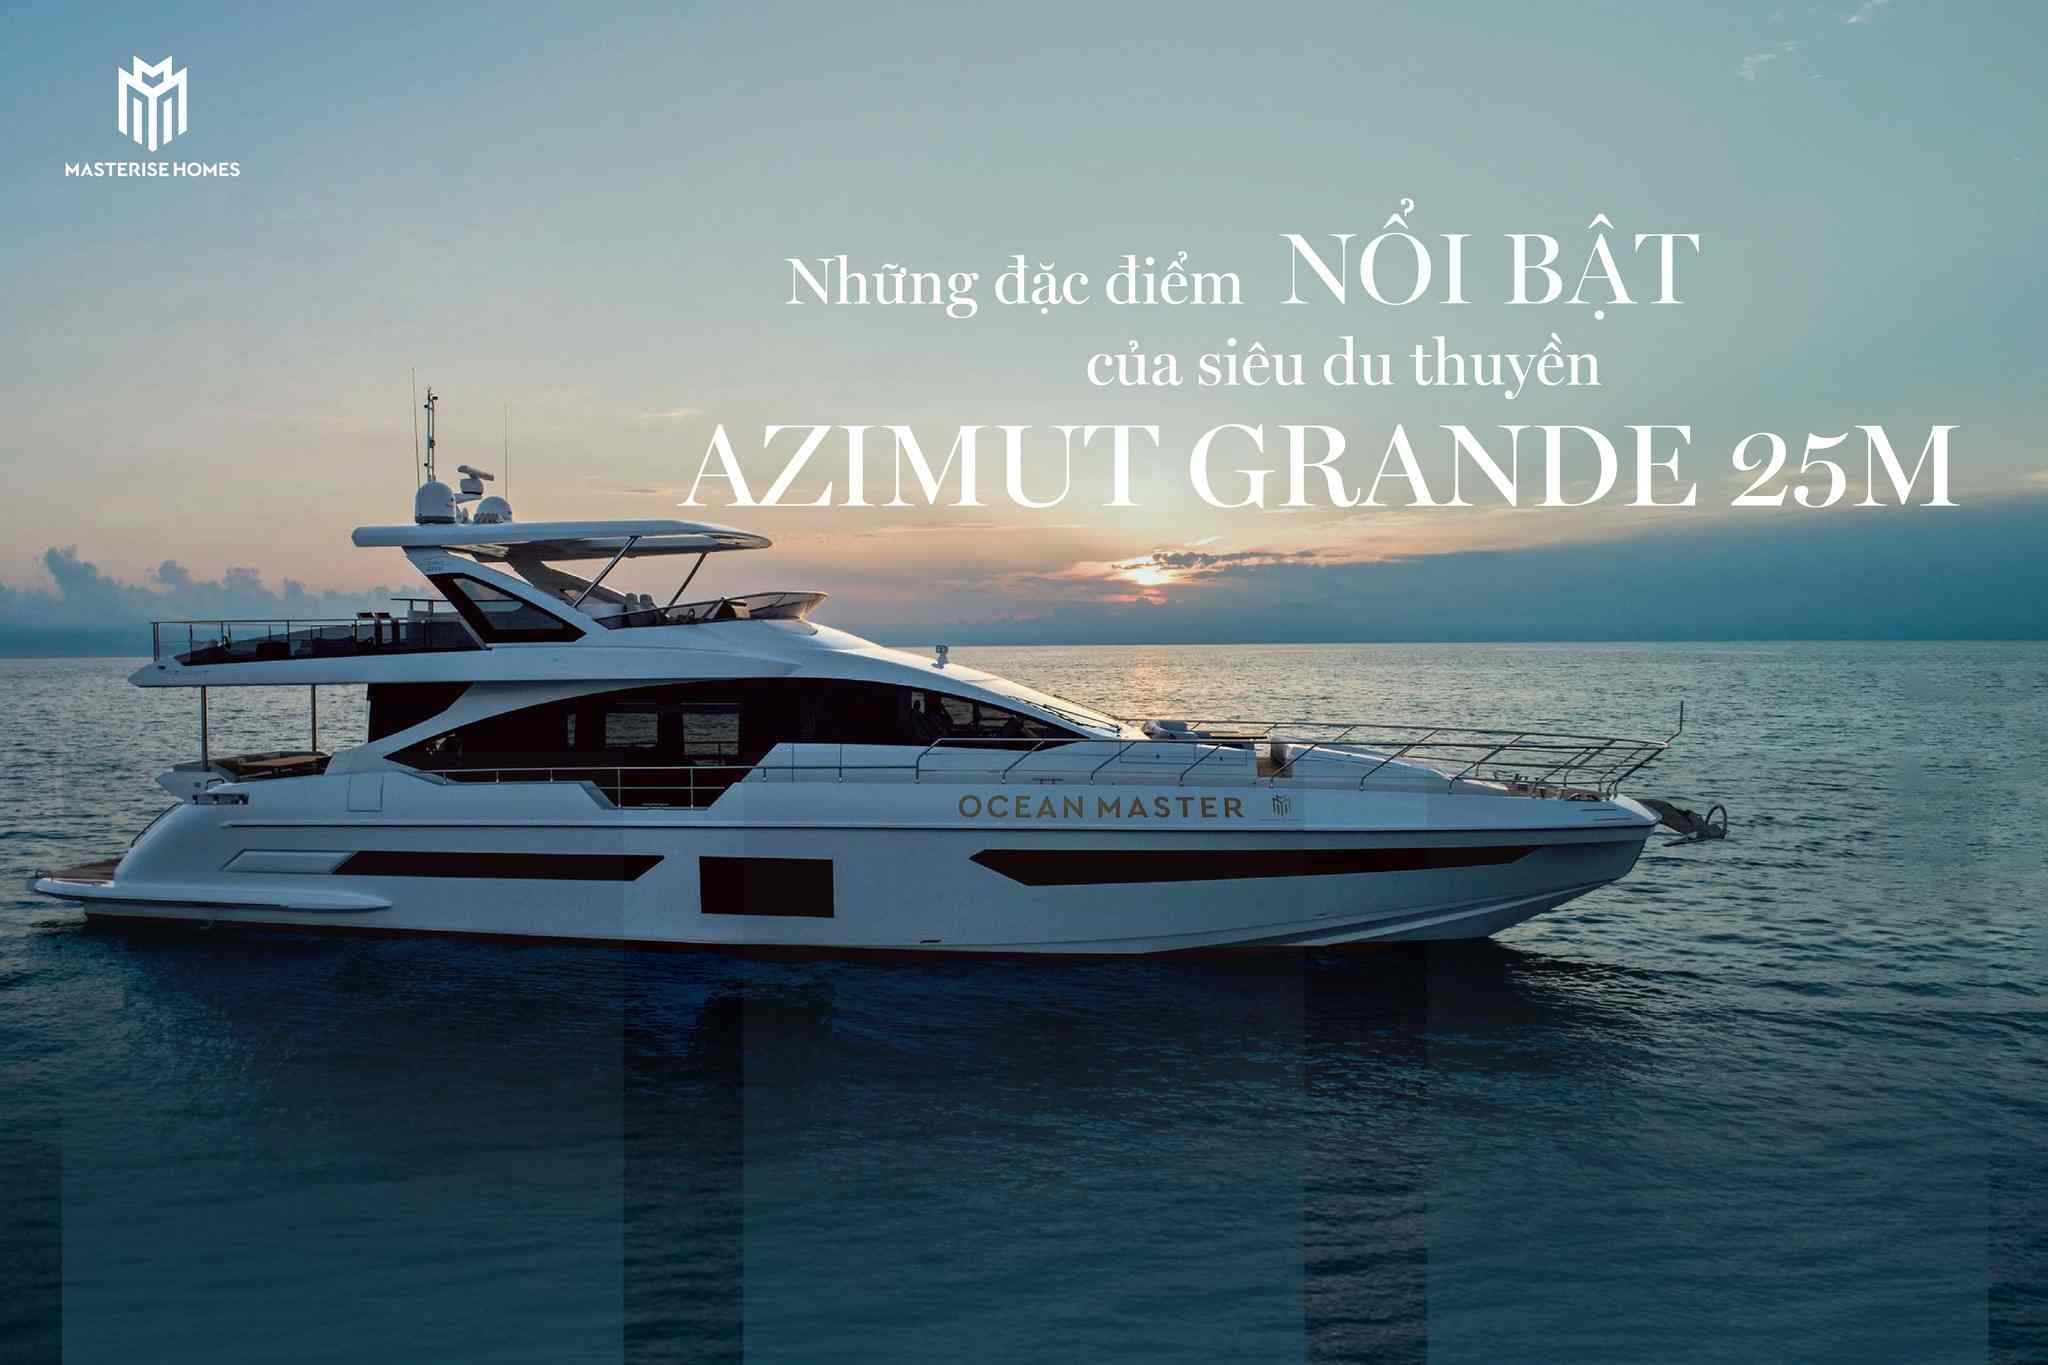 Grand Marina Saigon - HIGHLIGHTS THAT HELPED AZIMUT GRANDE 25M BECOME A LIMITED VERSION SUPER Yacht IN THE WORLD